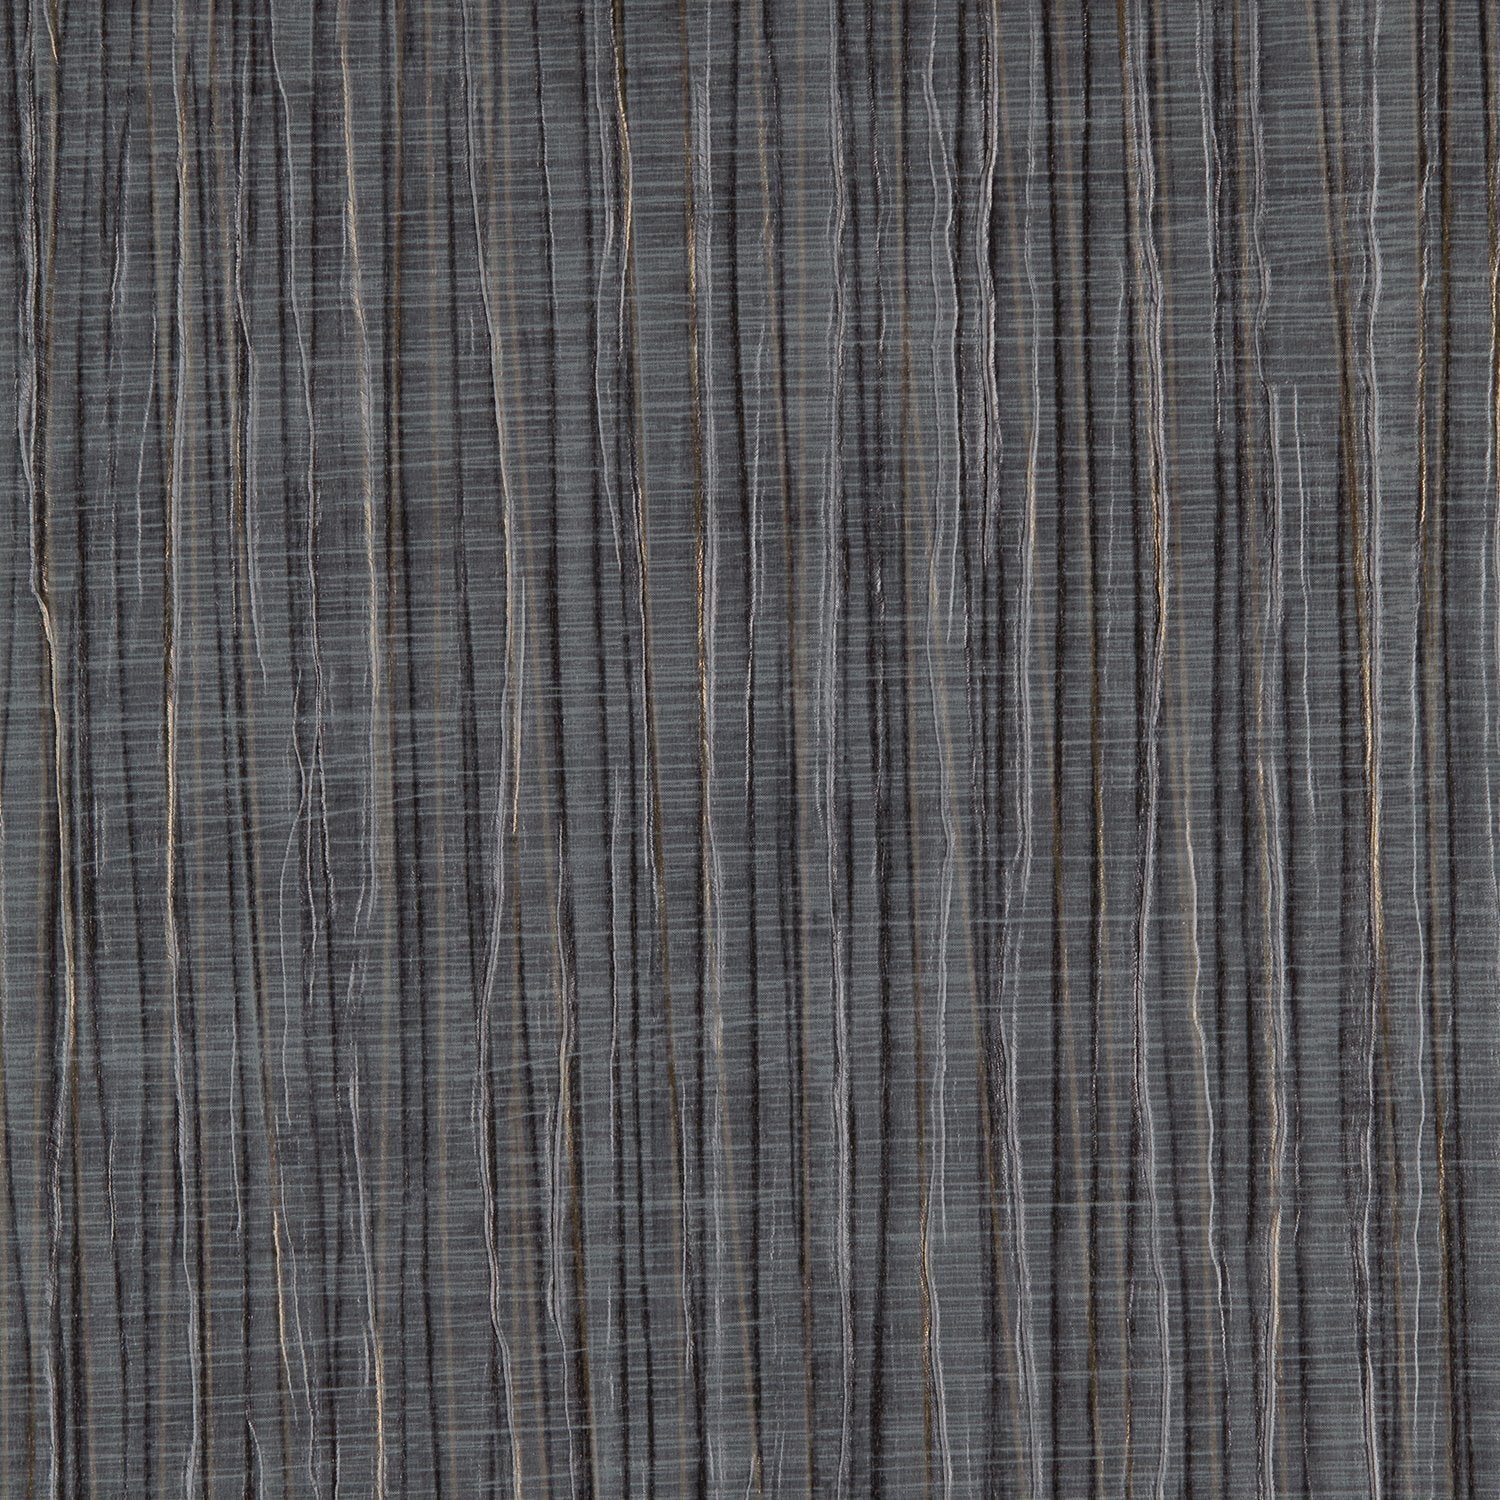 Vogue Pleat - Y47020 - Wallcovering - Vycon - Kube Contract